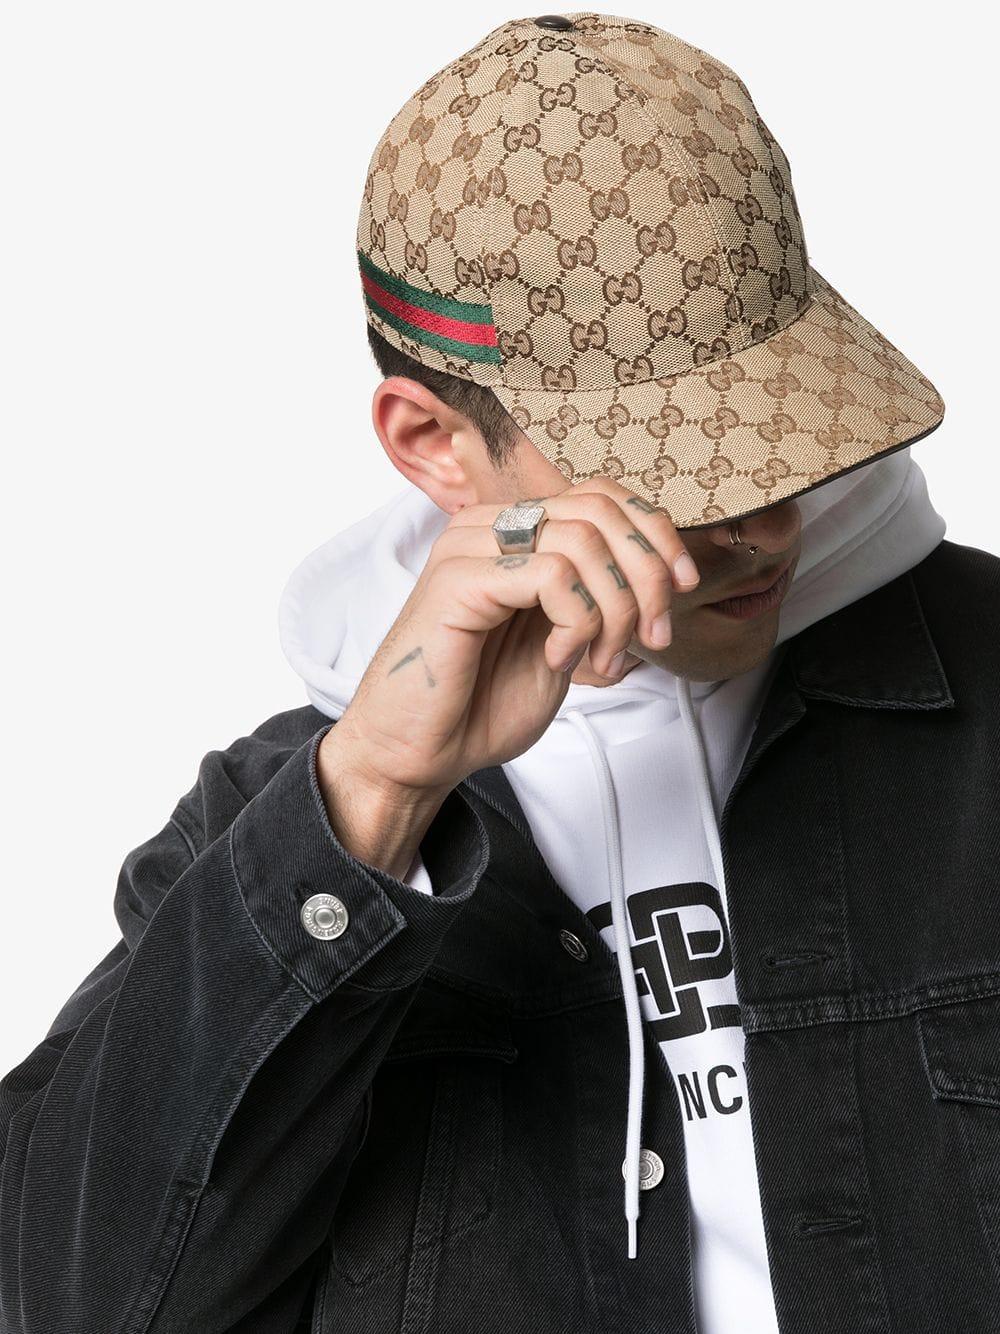 GG Supreme Canvas And Mesh Baseball Cap in Brown - Gucci